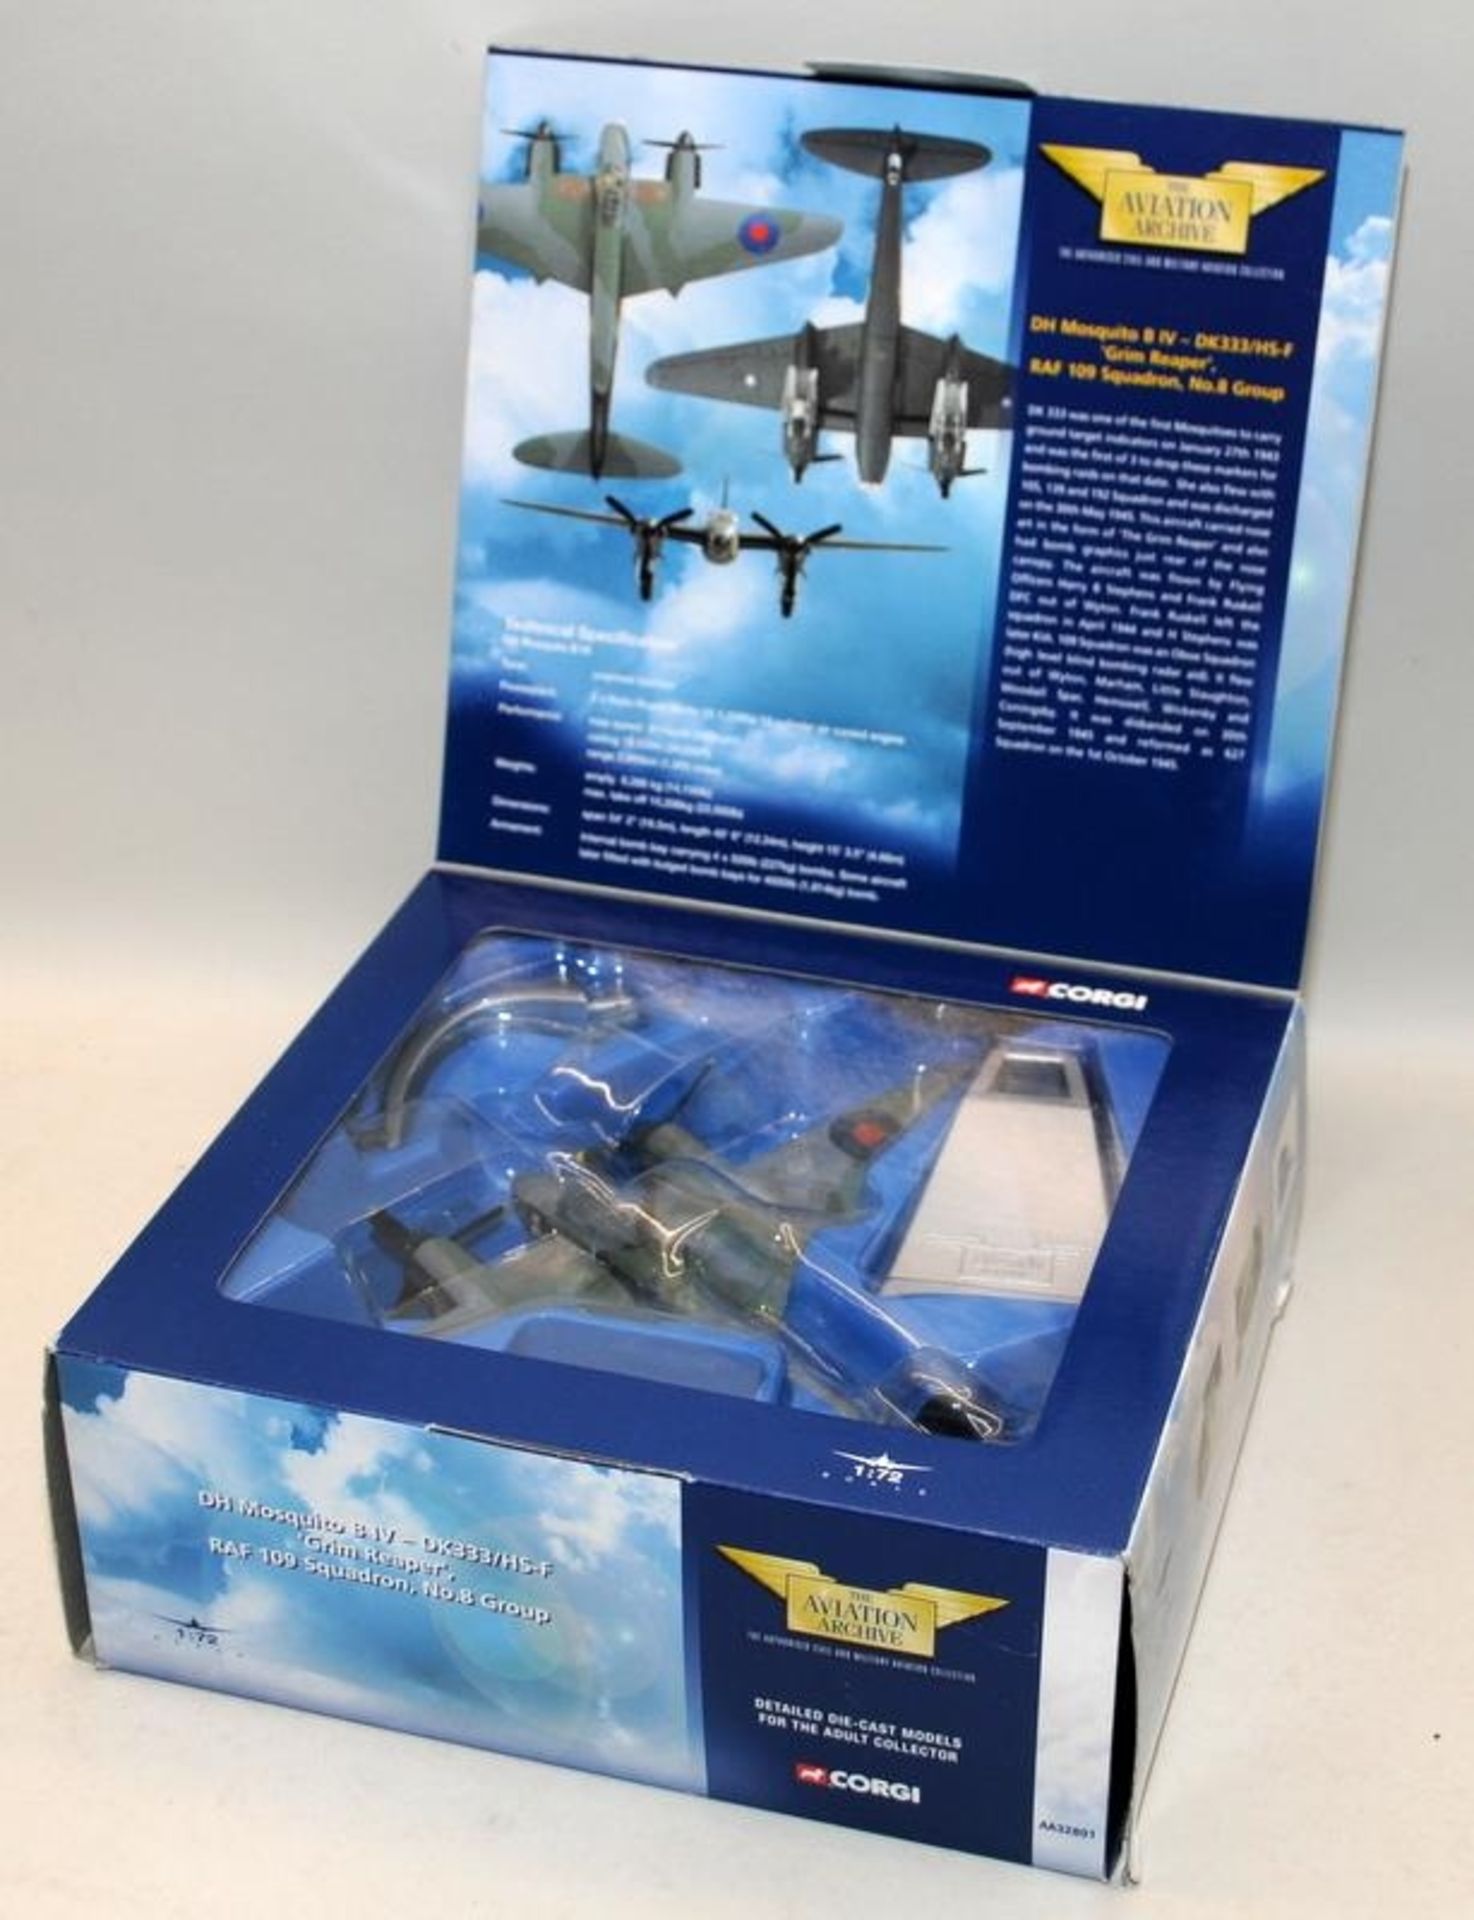 Aviation Archive Die-Cast Model Aircraft: 1:72 scale DH Mosquito B IV :144 scaleAvro Lancaster - Image 2 of 3